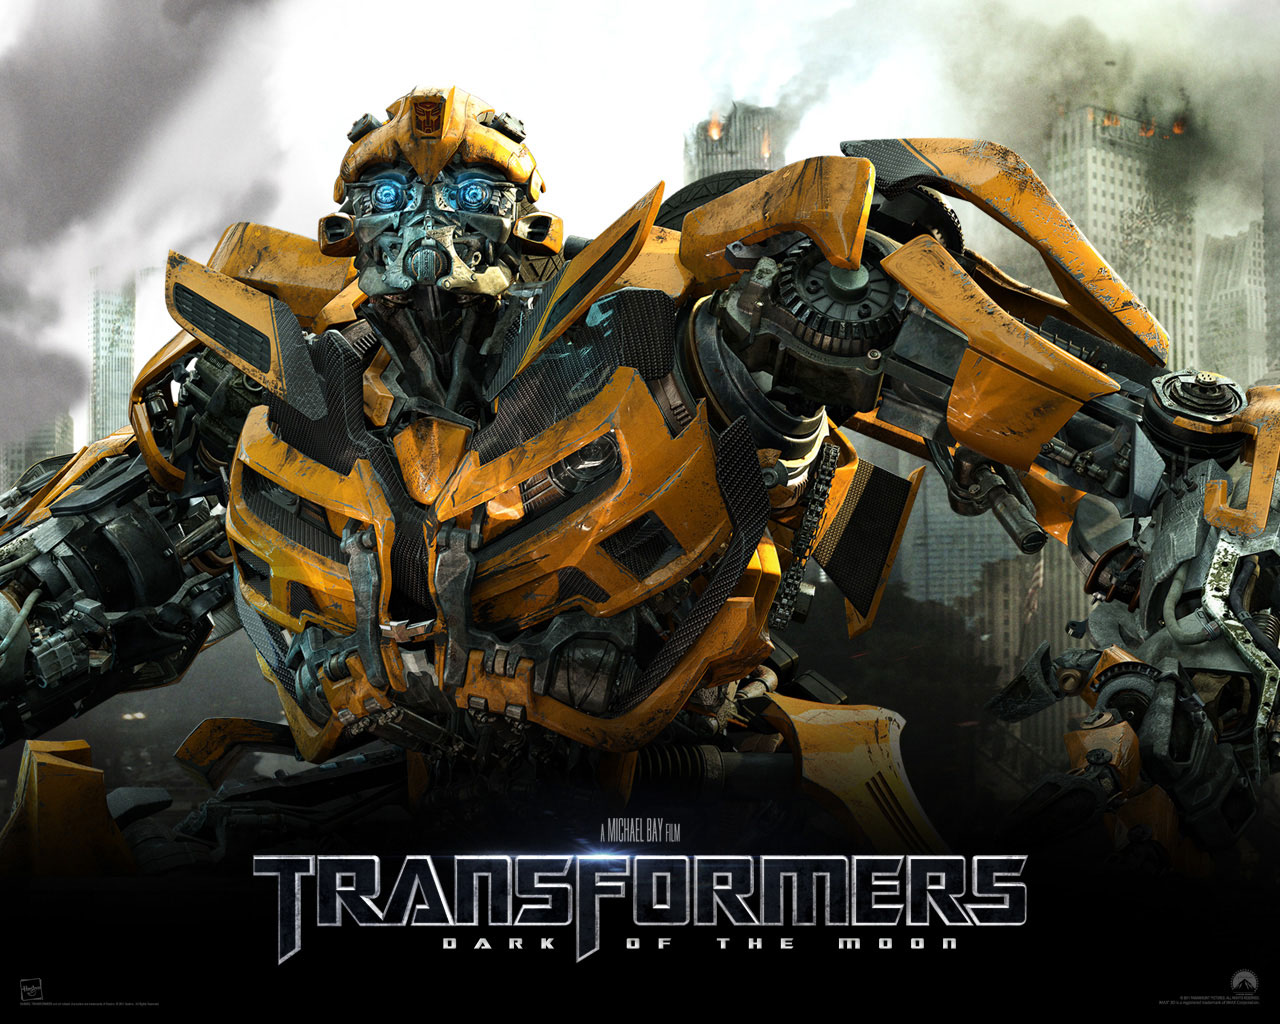 [50+] Transformer Screensavers and Wallpapers on ...